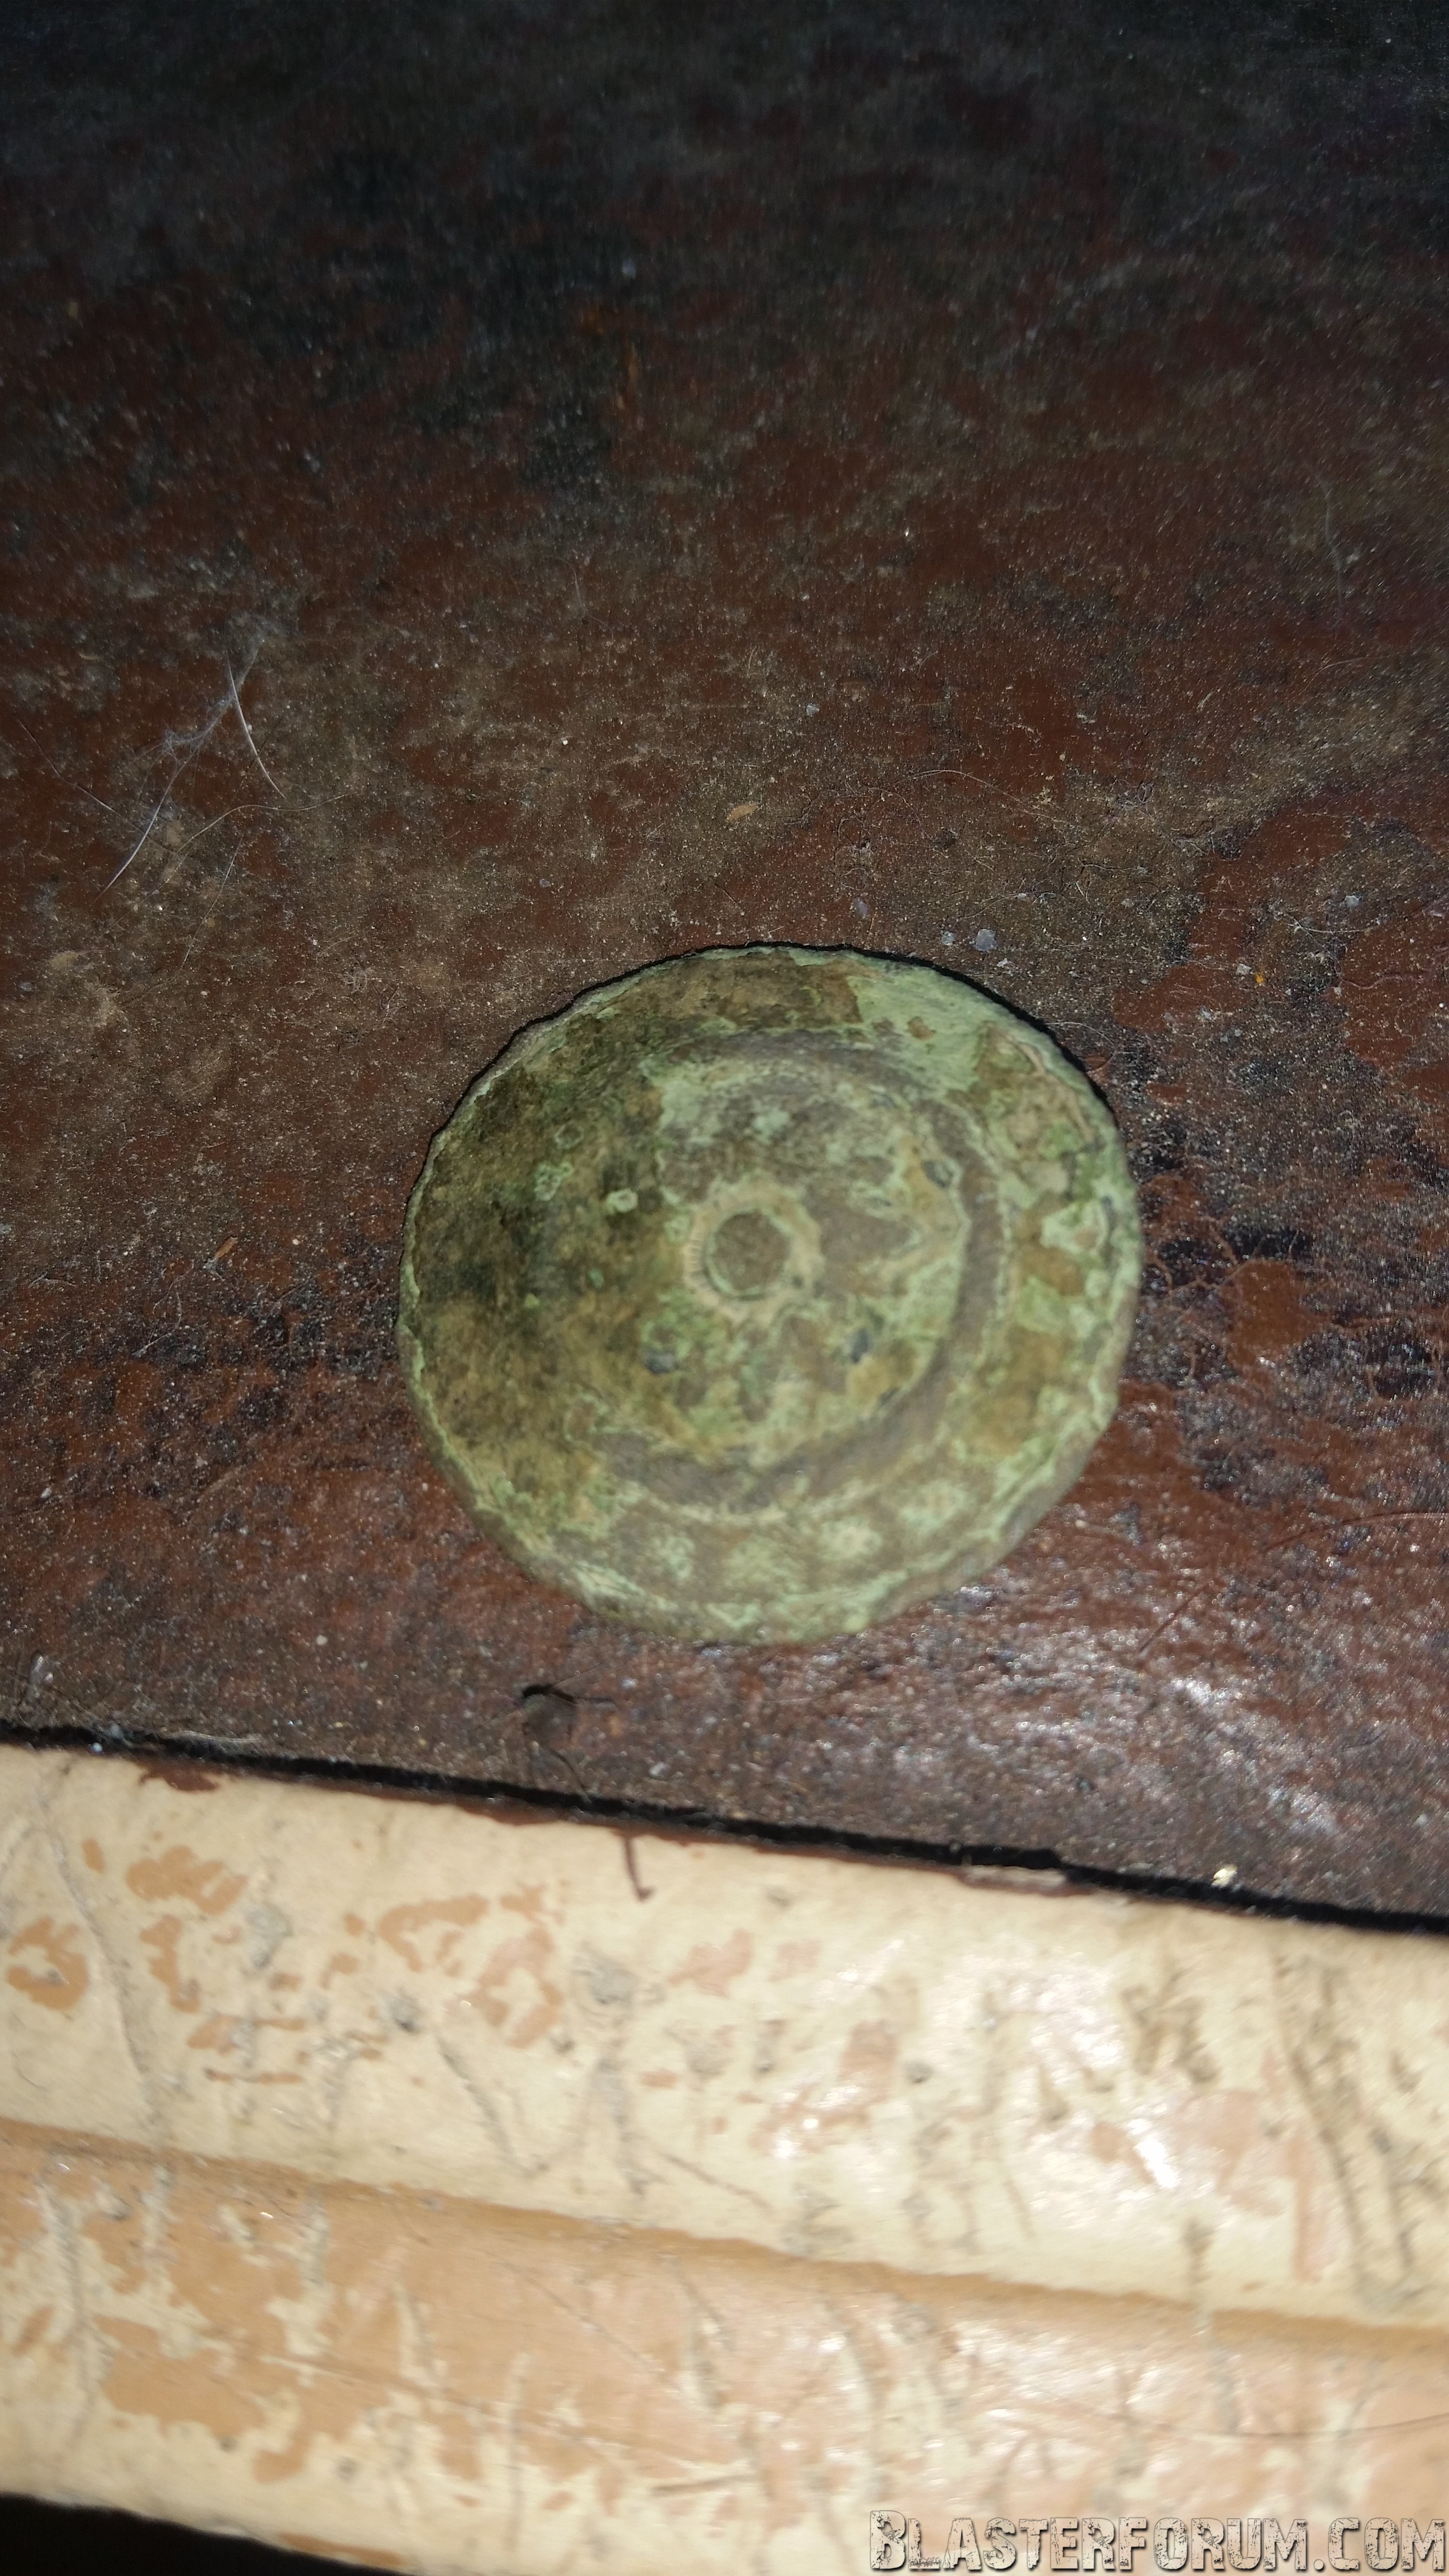 Old flat button found metal detecting.